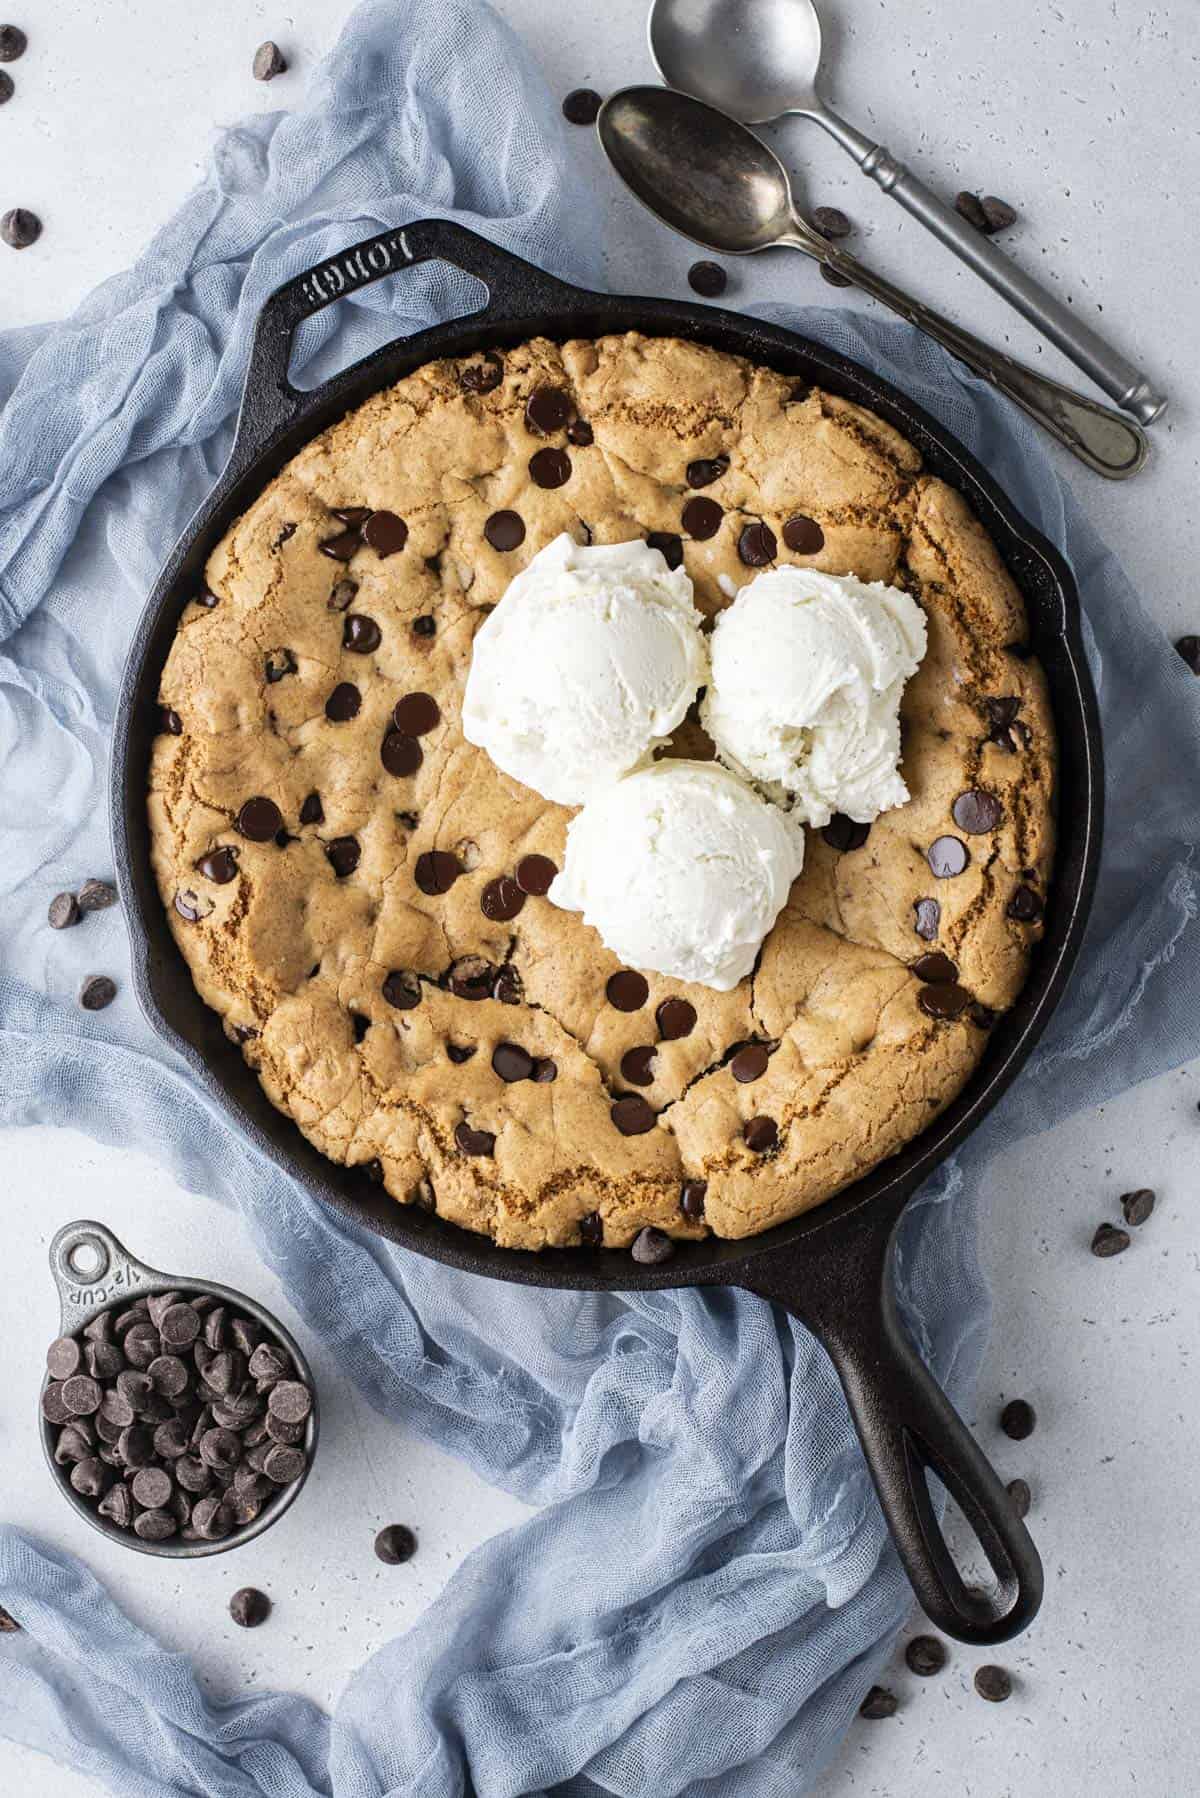 overhead view of a cast iron skillet full of pizookie with three scoops of vanilla ice cream on top, the skillet sitting on a blue cloth surrounded by chocolate chips scattered around, a cup of chocolate chips and two spoons